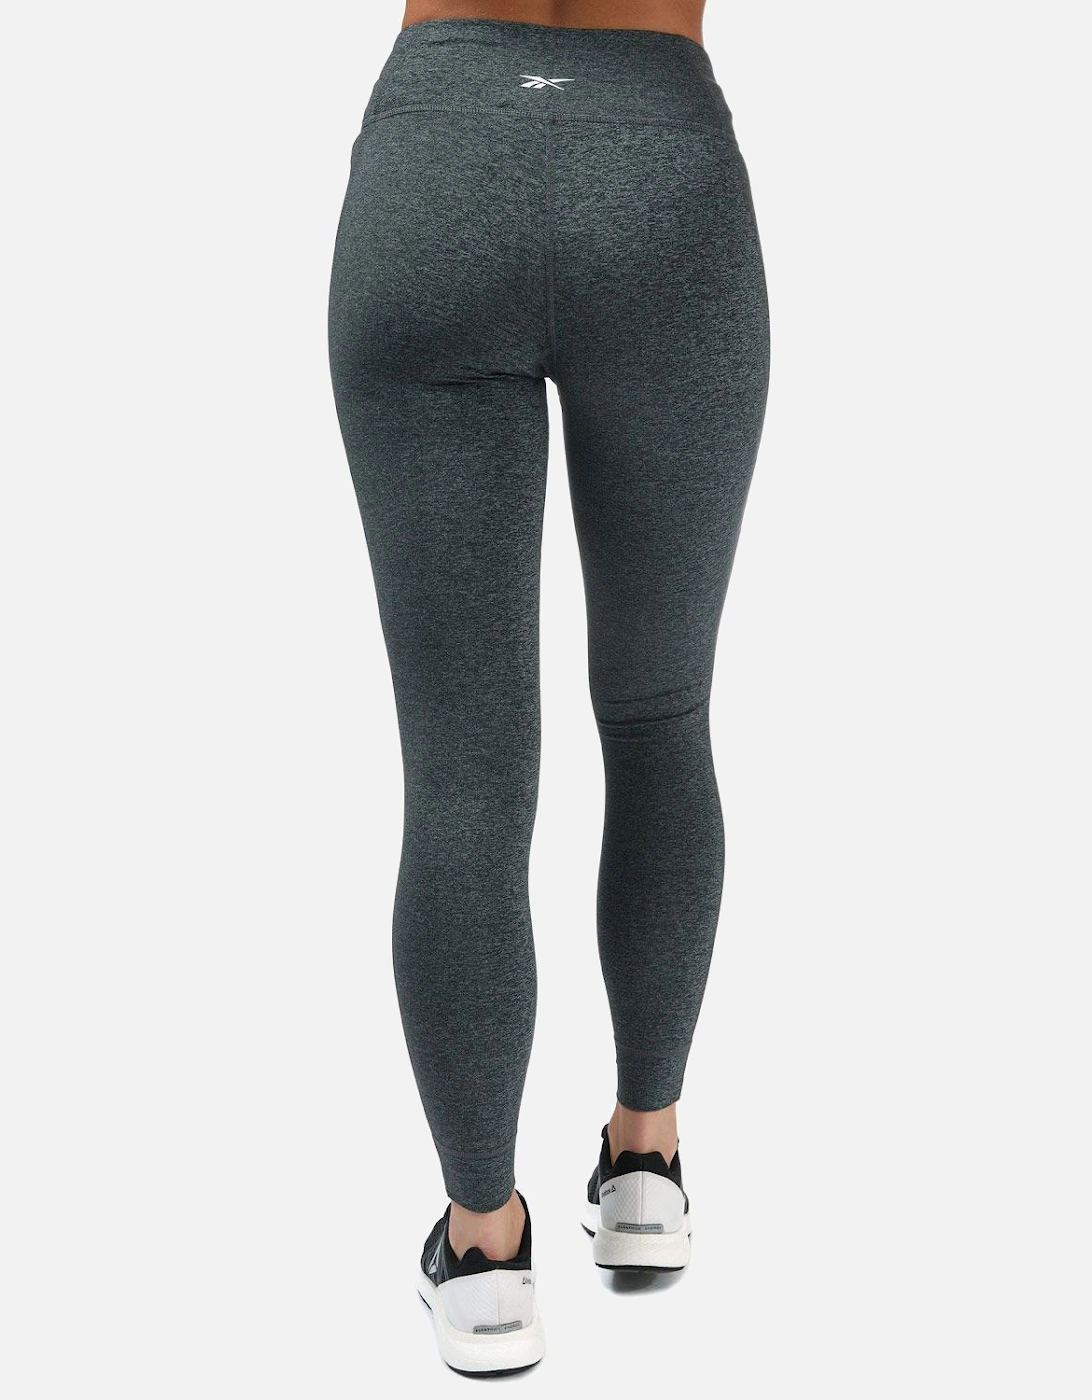 Womens Lux Tights 2.0